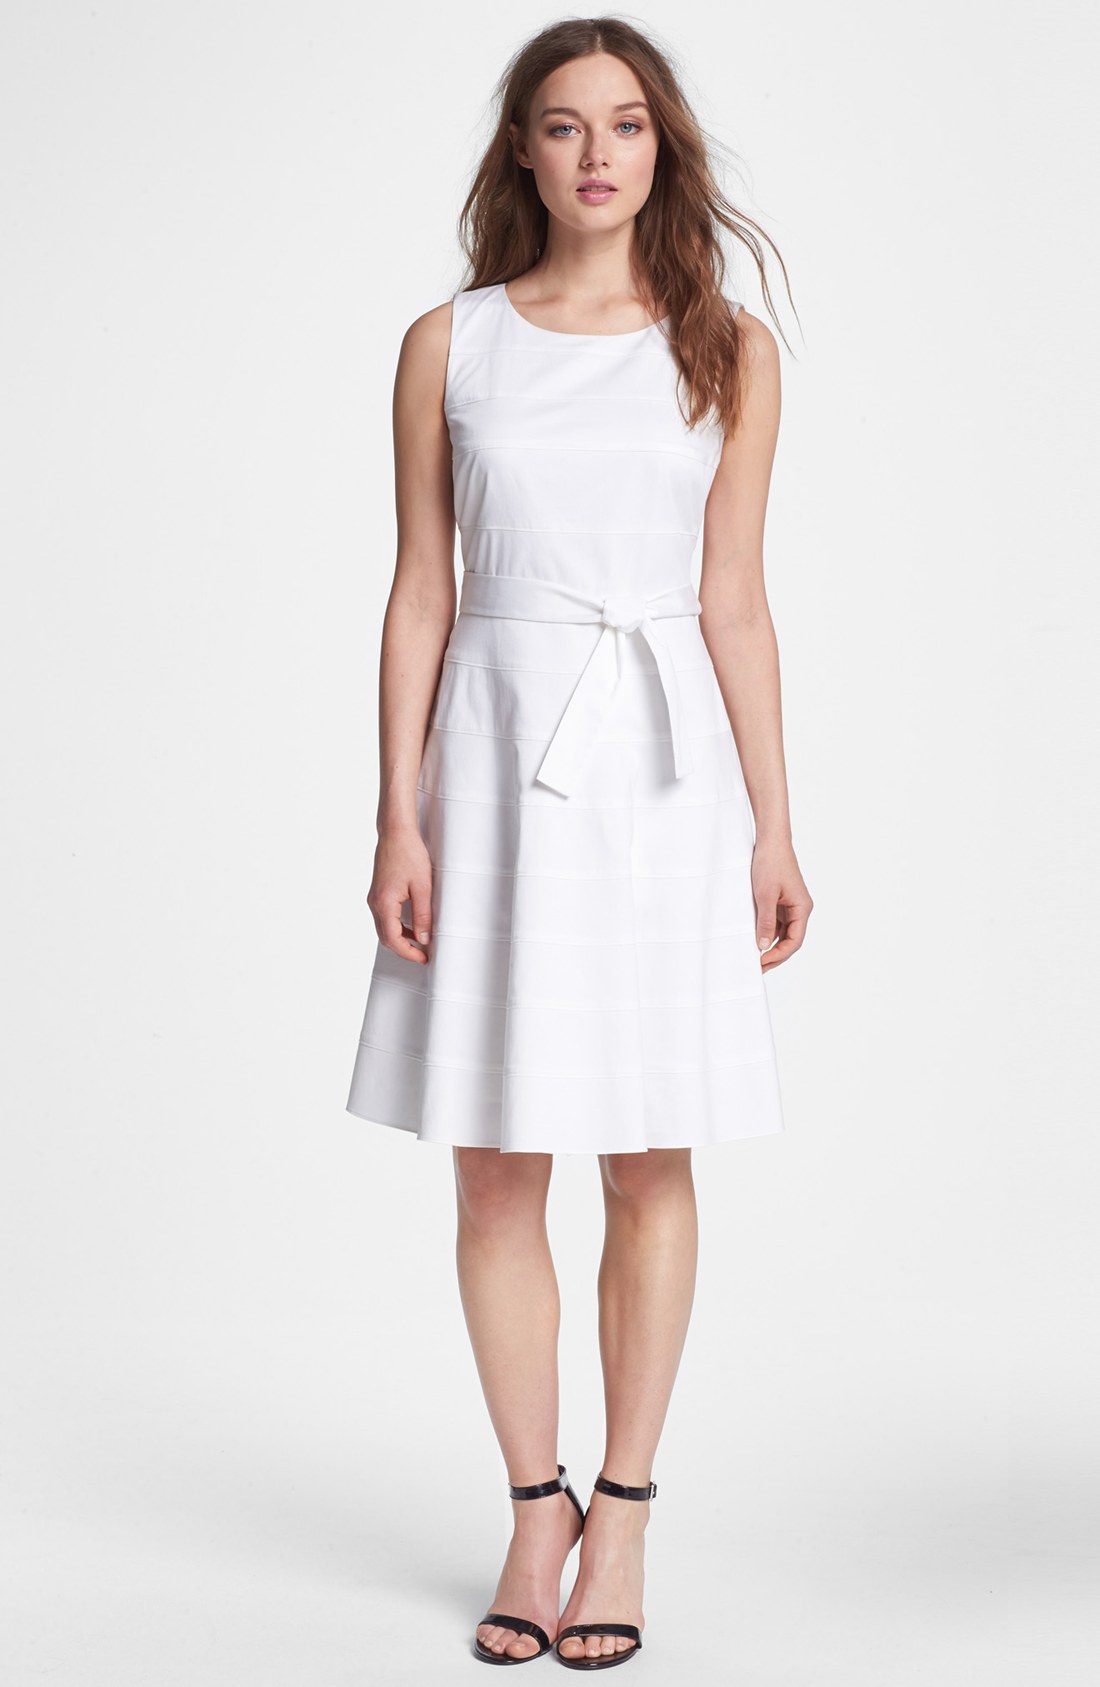 Calvin Klein Banded Fit Flare Dress in White